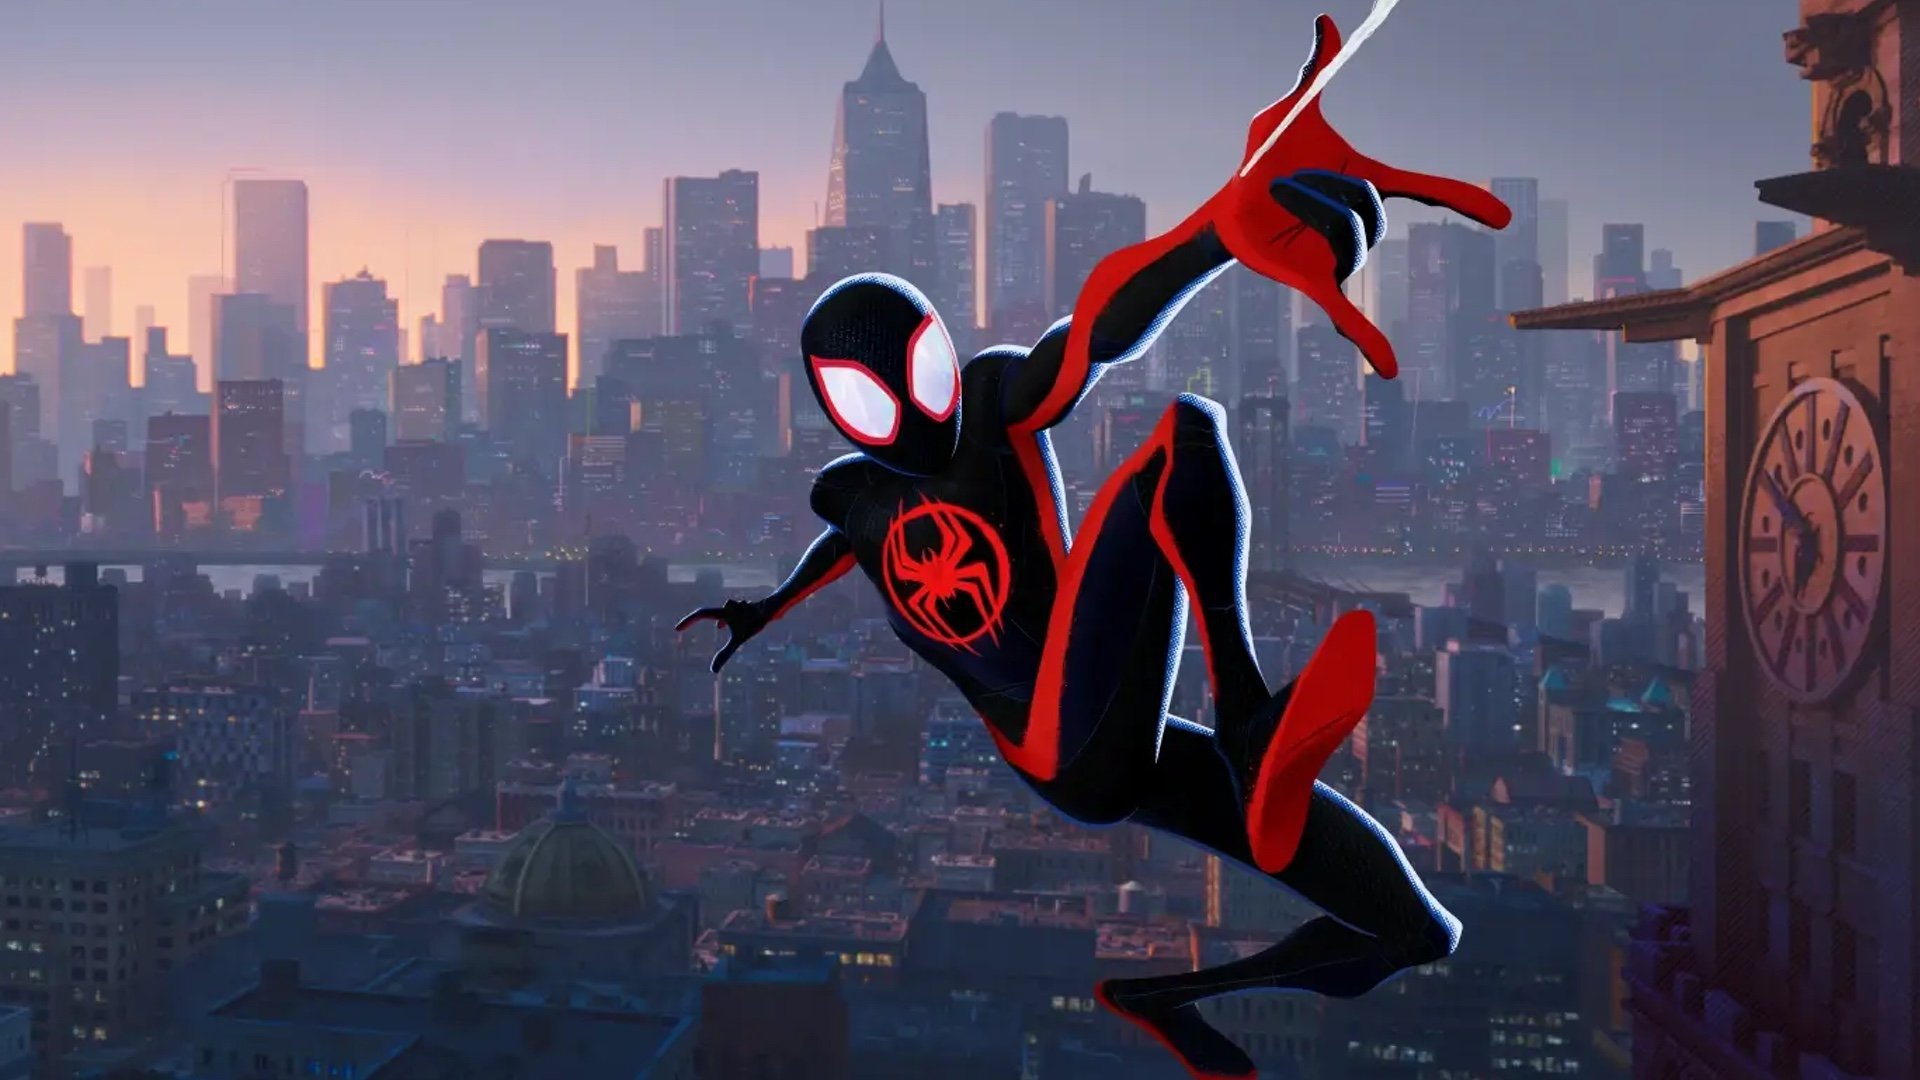 Spider-Man: Across the Spider-Verse Review